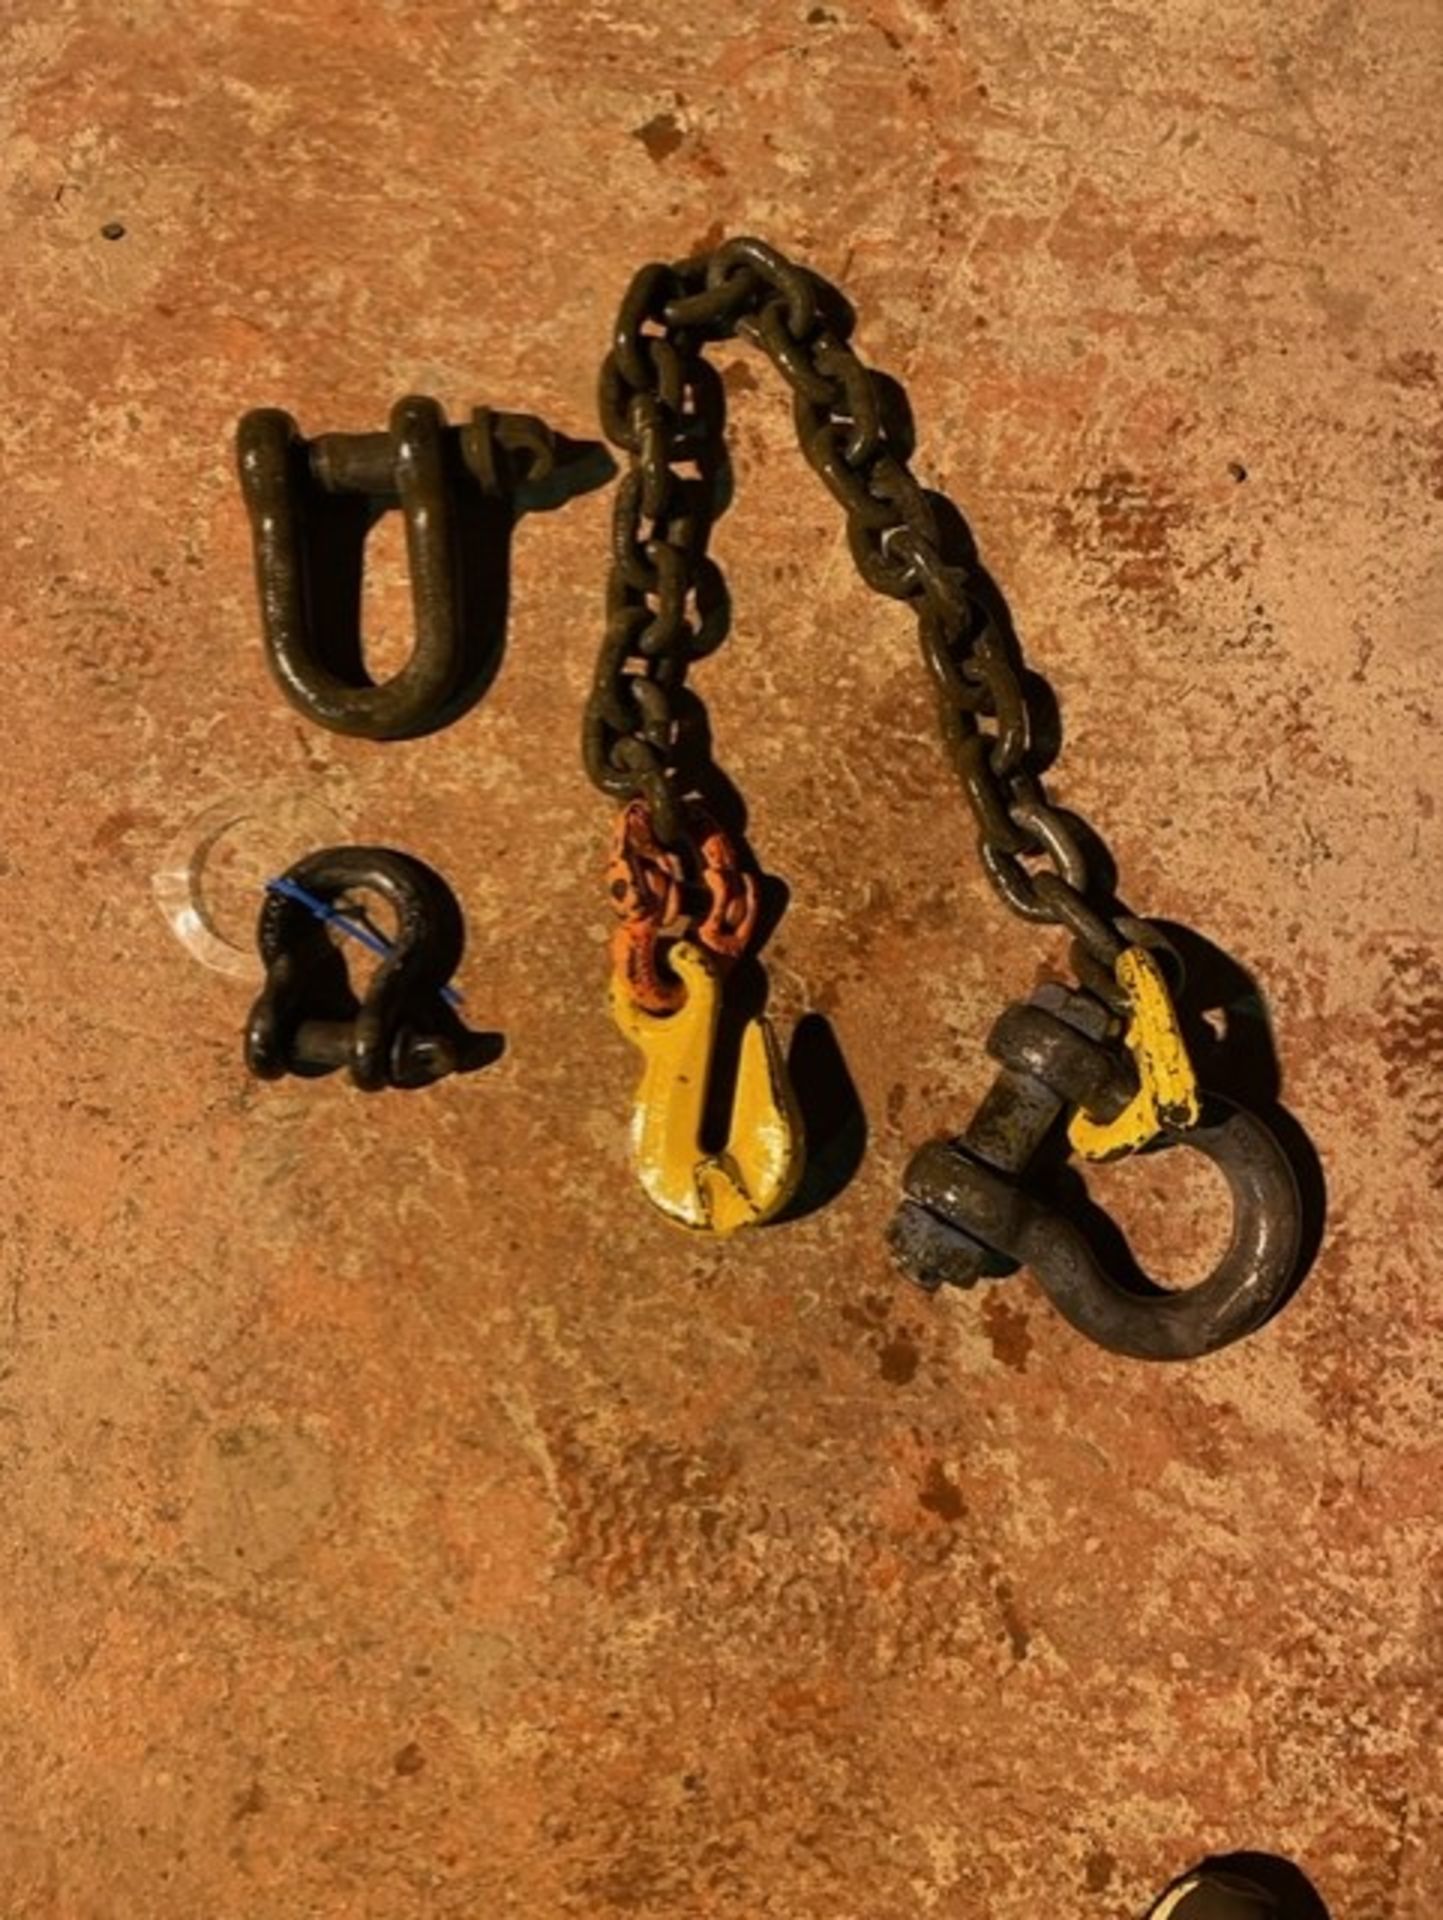 Drop chain large with u bolt and 2 smaller u bolts